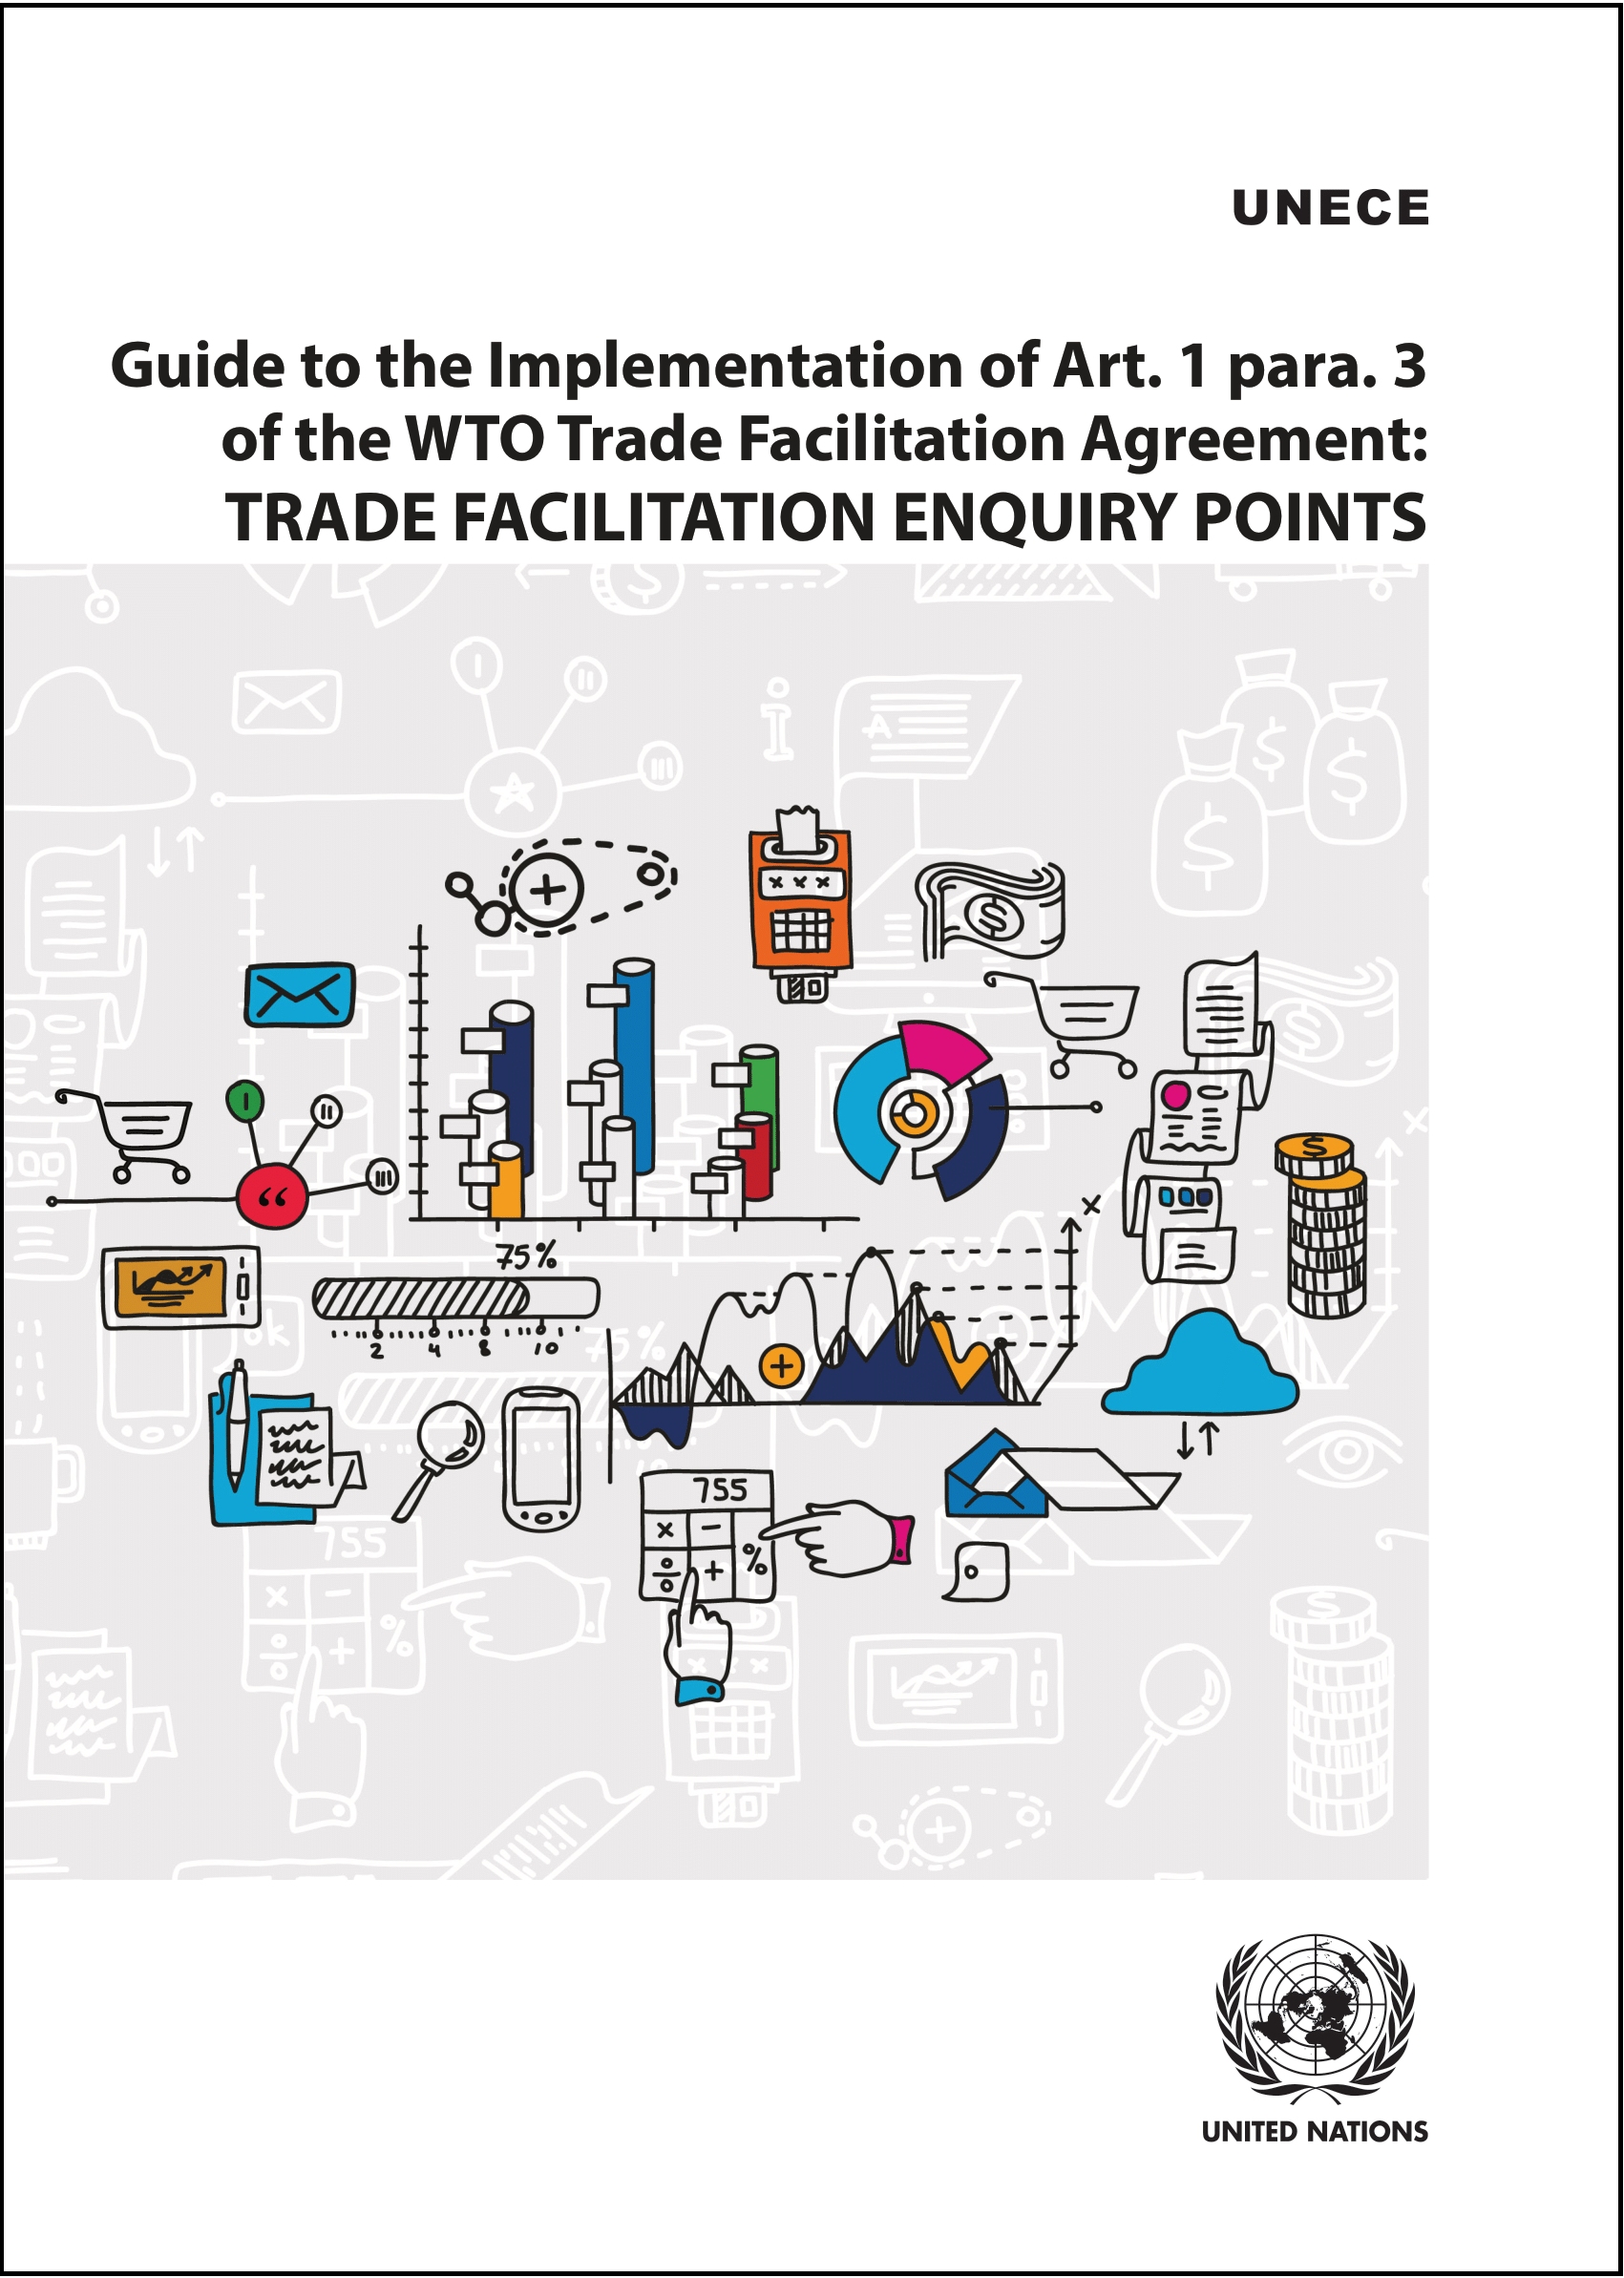 Guide to the Implementation of Art. 1 para. 3 of the WTO TFA - TFA Enquiry Points